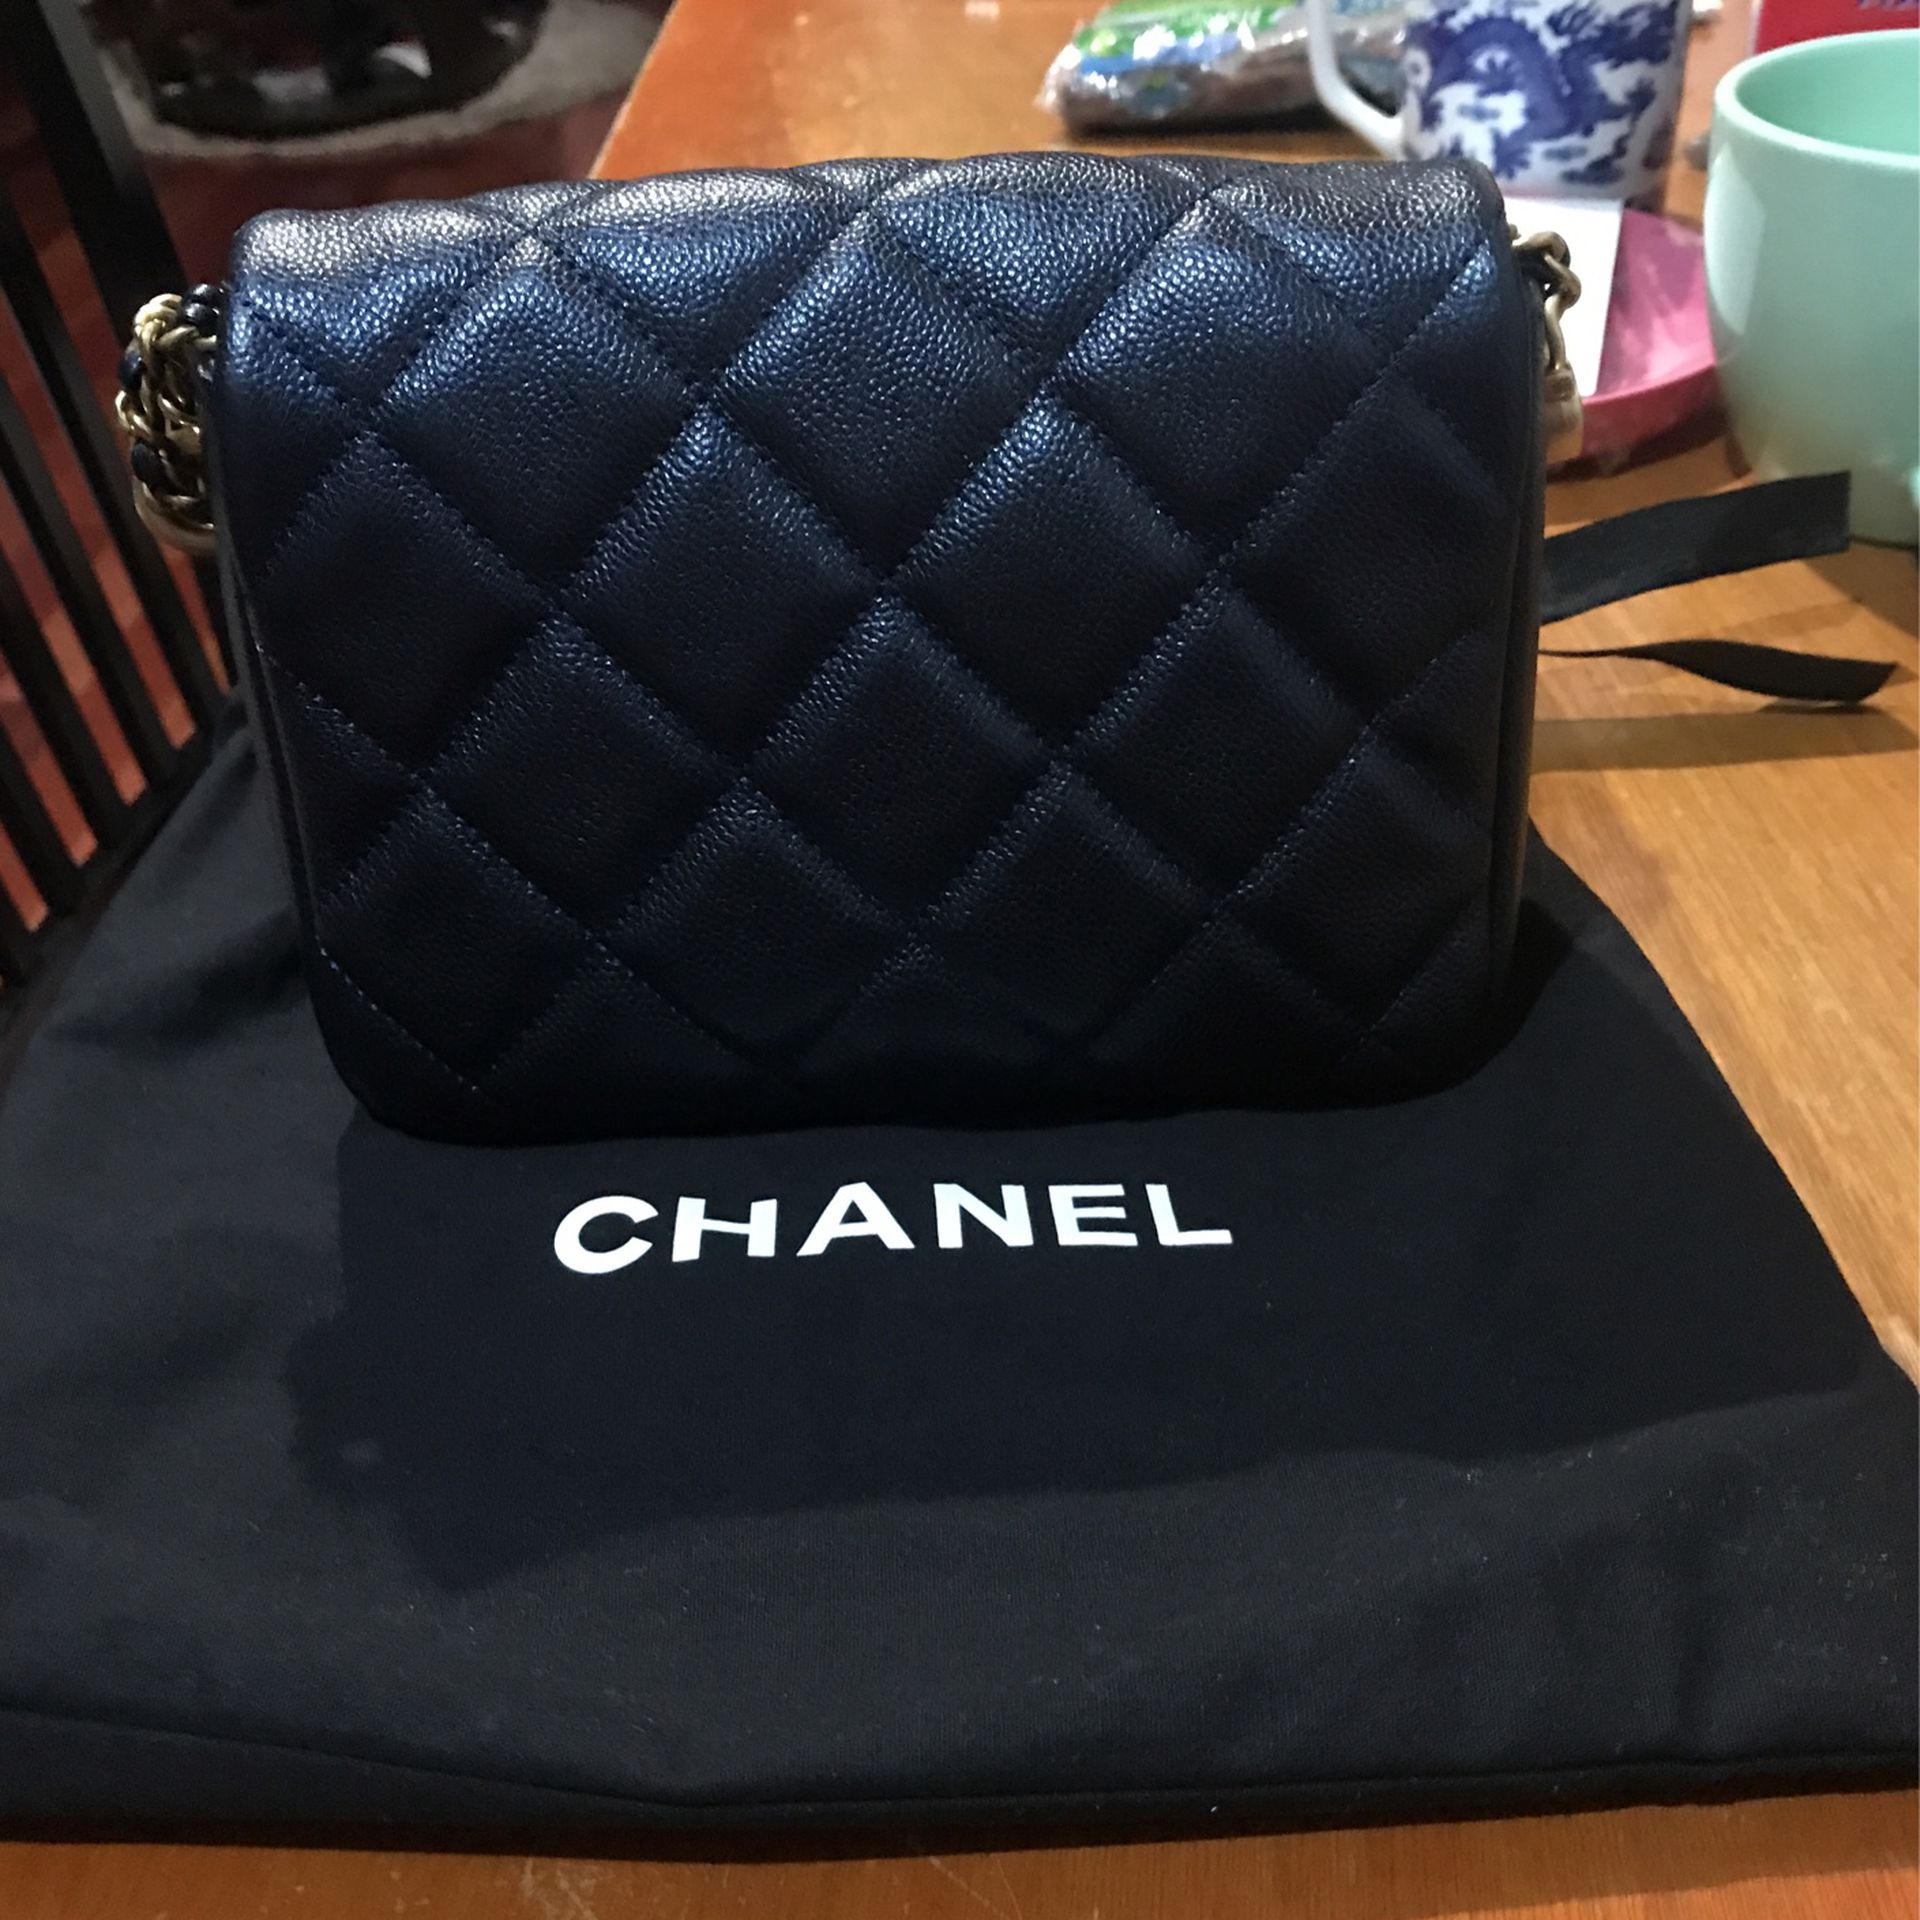 Chanel 21k Seasonal Bag for Sale in Queens, NY - OfferUp